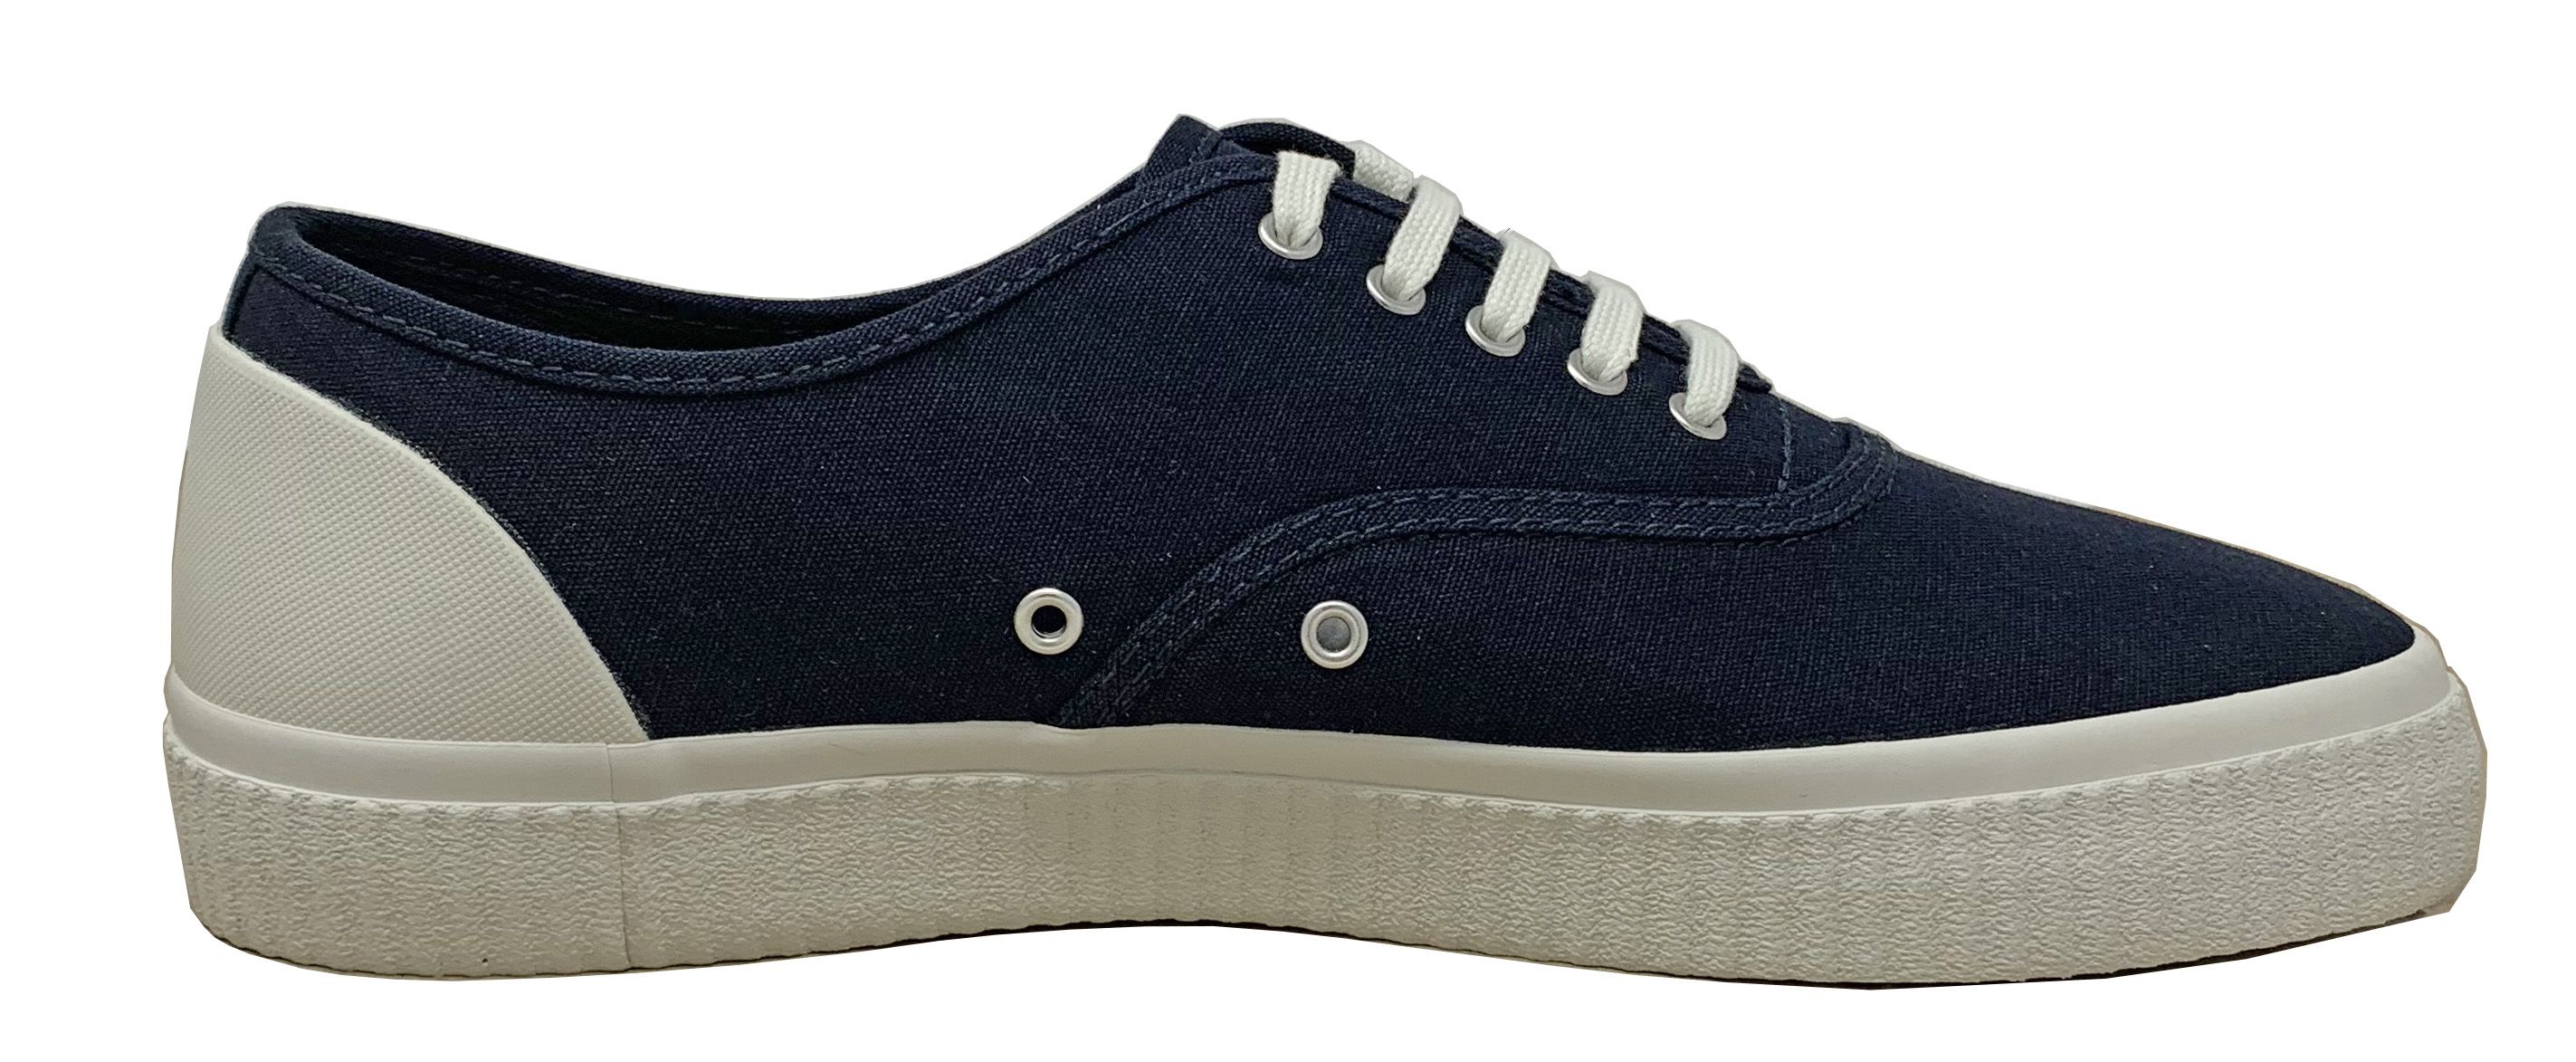 Fred Perry B2060 608 Barson Canvas Trainers. Fred Perry Navy Blue Shoes. Upper Material Canvas. Rubber Sole. Tonal Branding To Heel. Gold Branding On Tongue, Lace Fasten